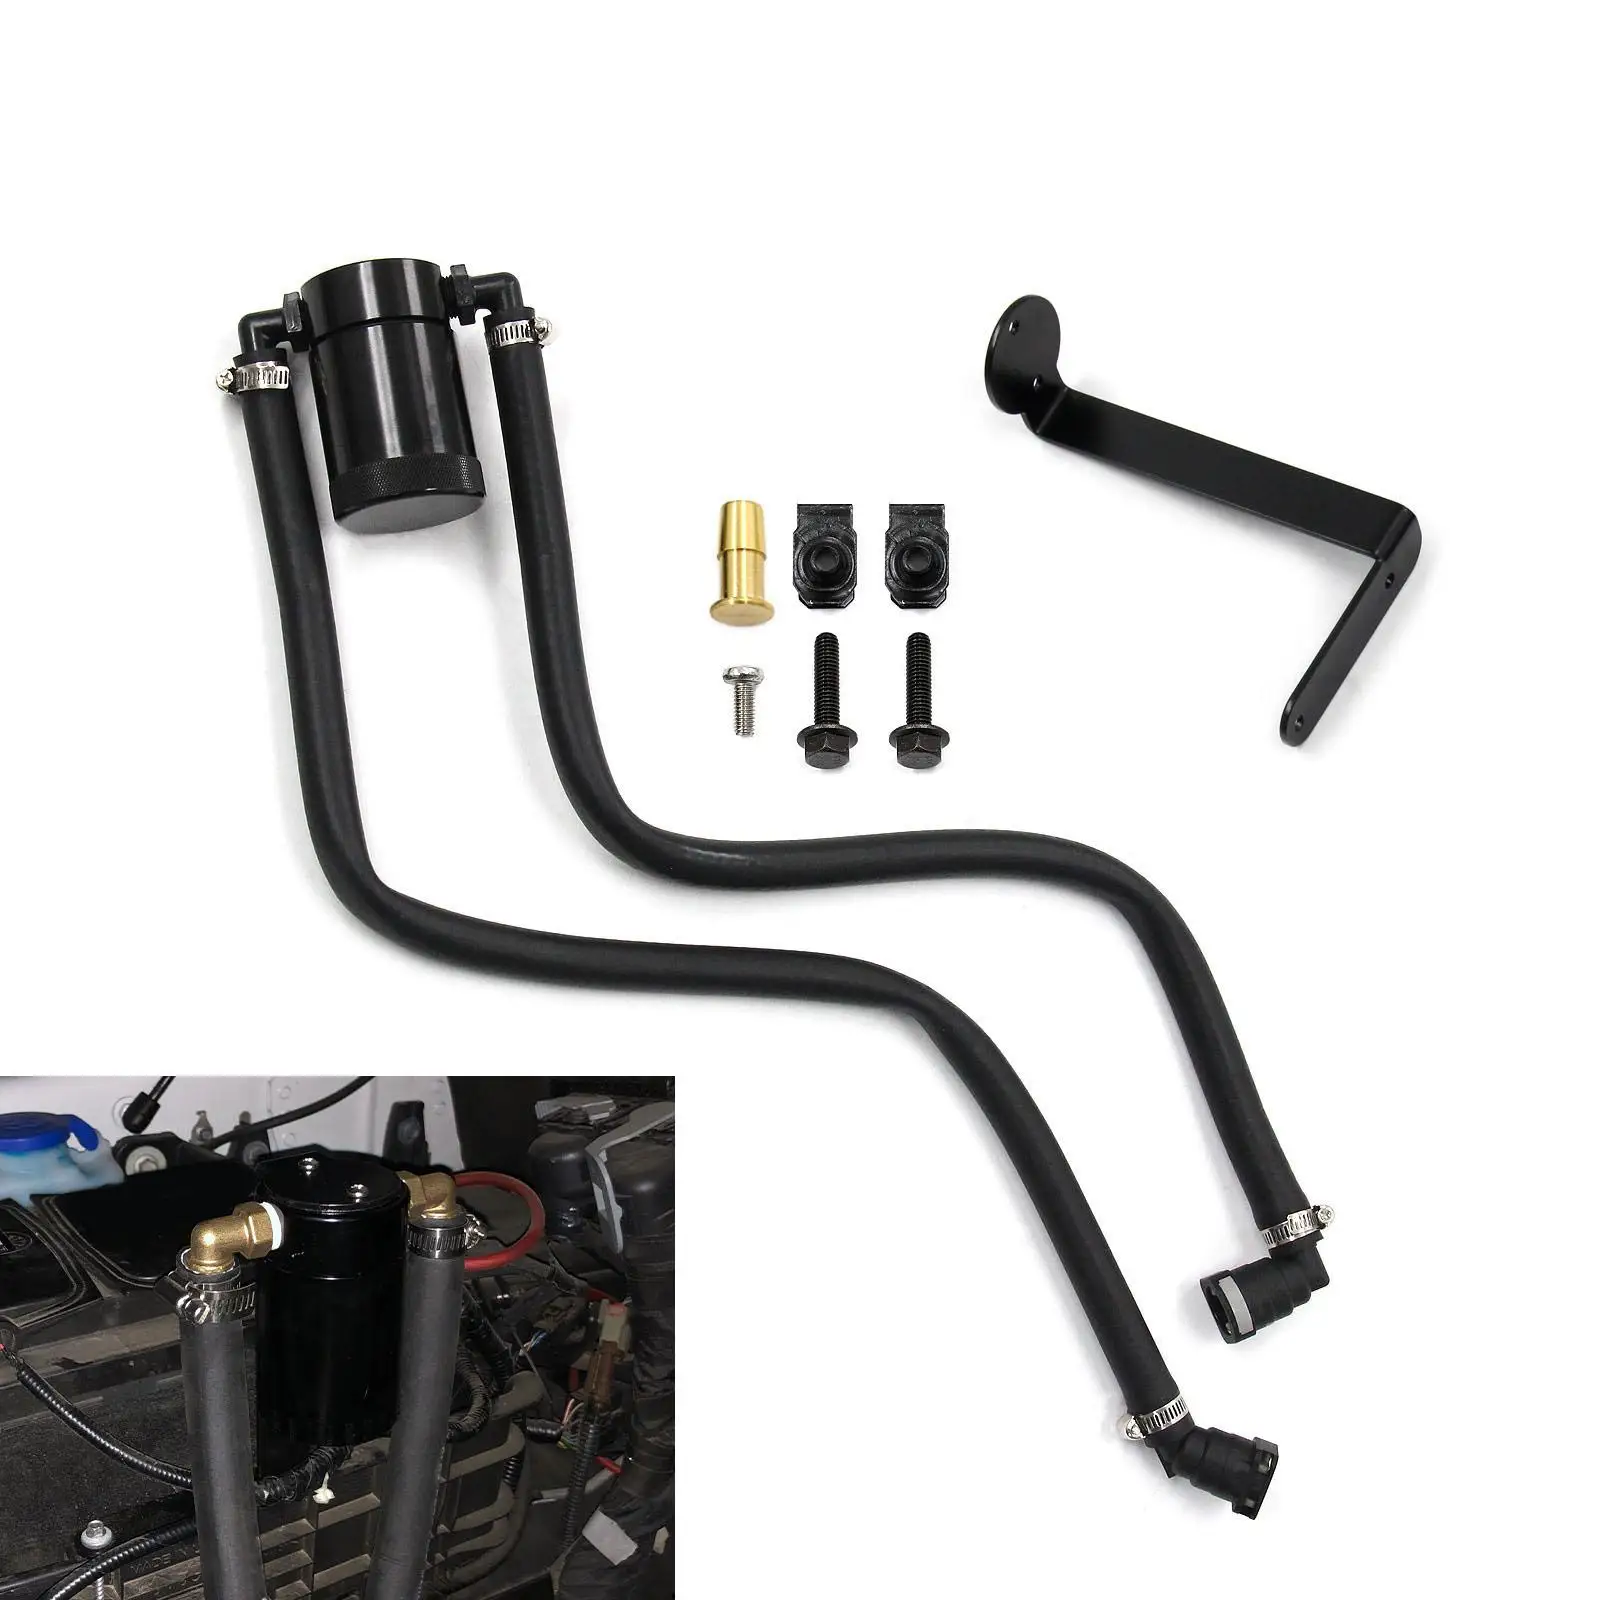 Oil Separator Replacement for Ford F-150 5.0L Expedition 3.5L Ecoboost